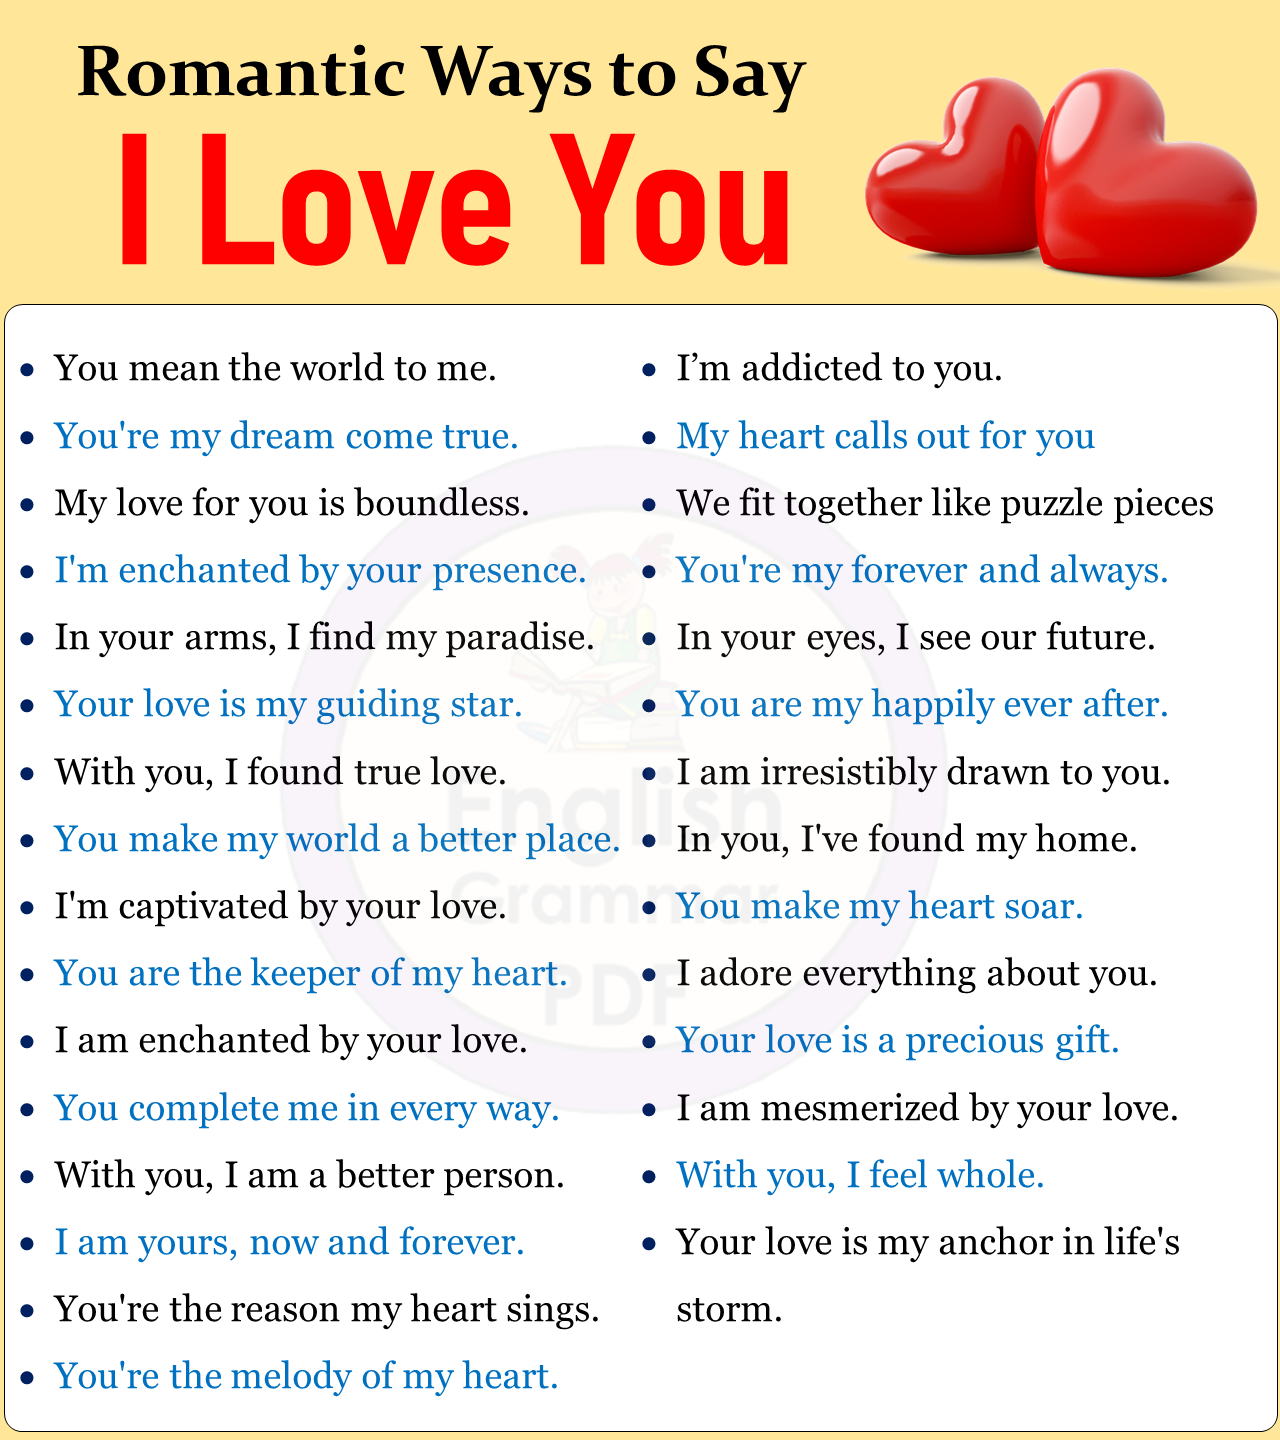 Ways to say I Love You